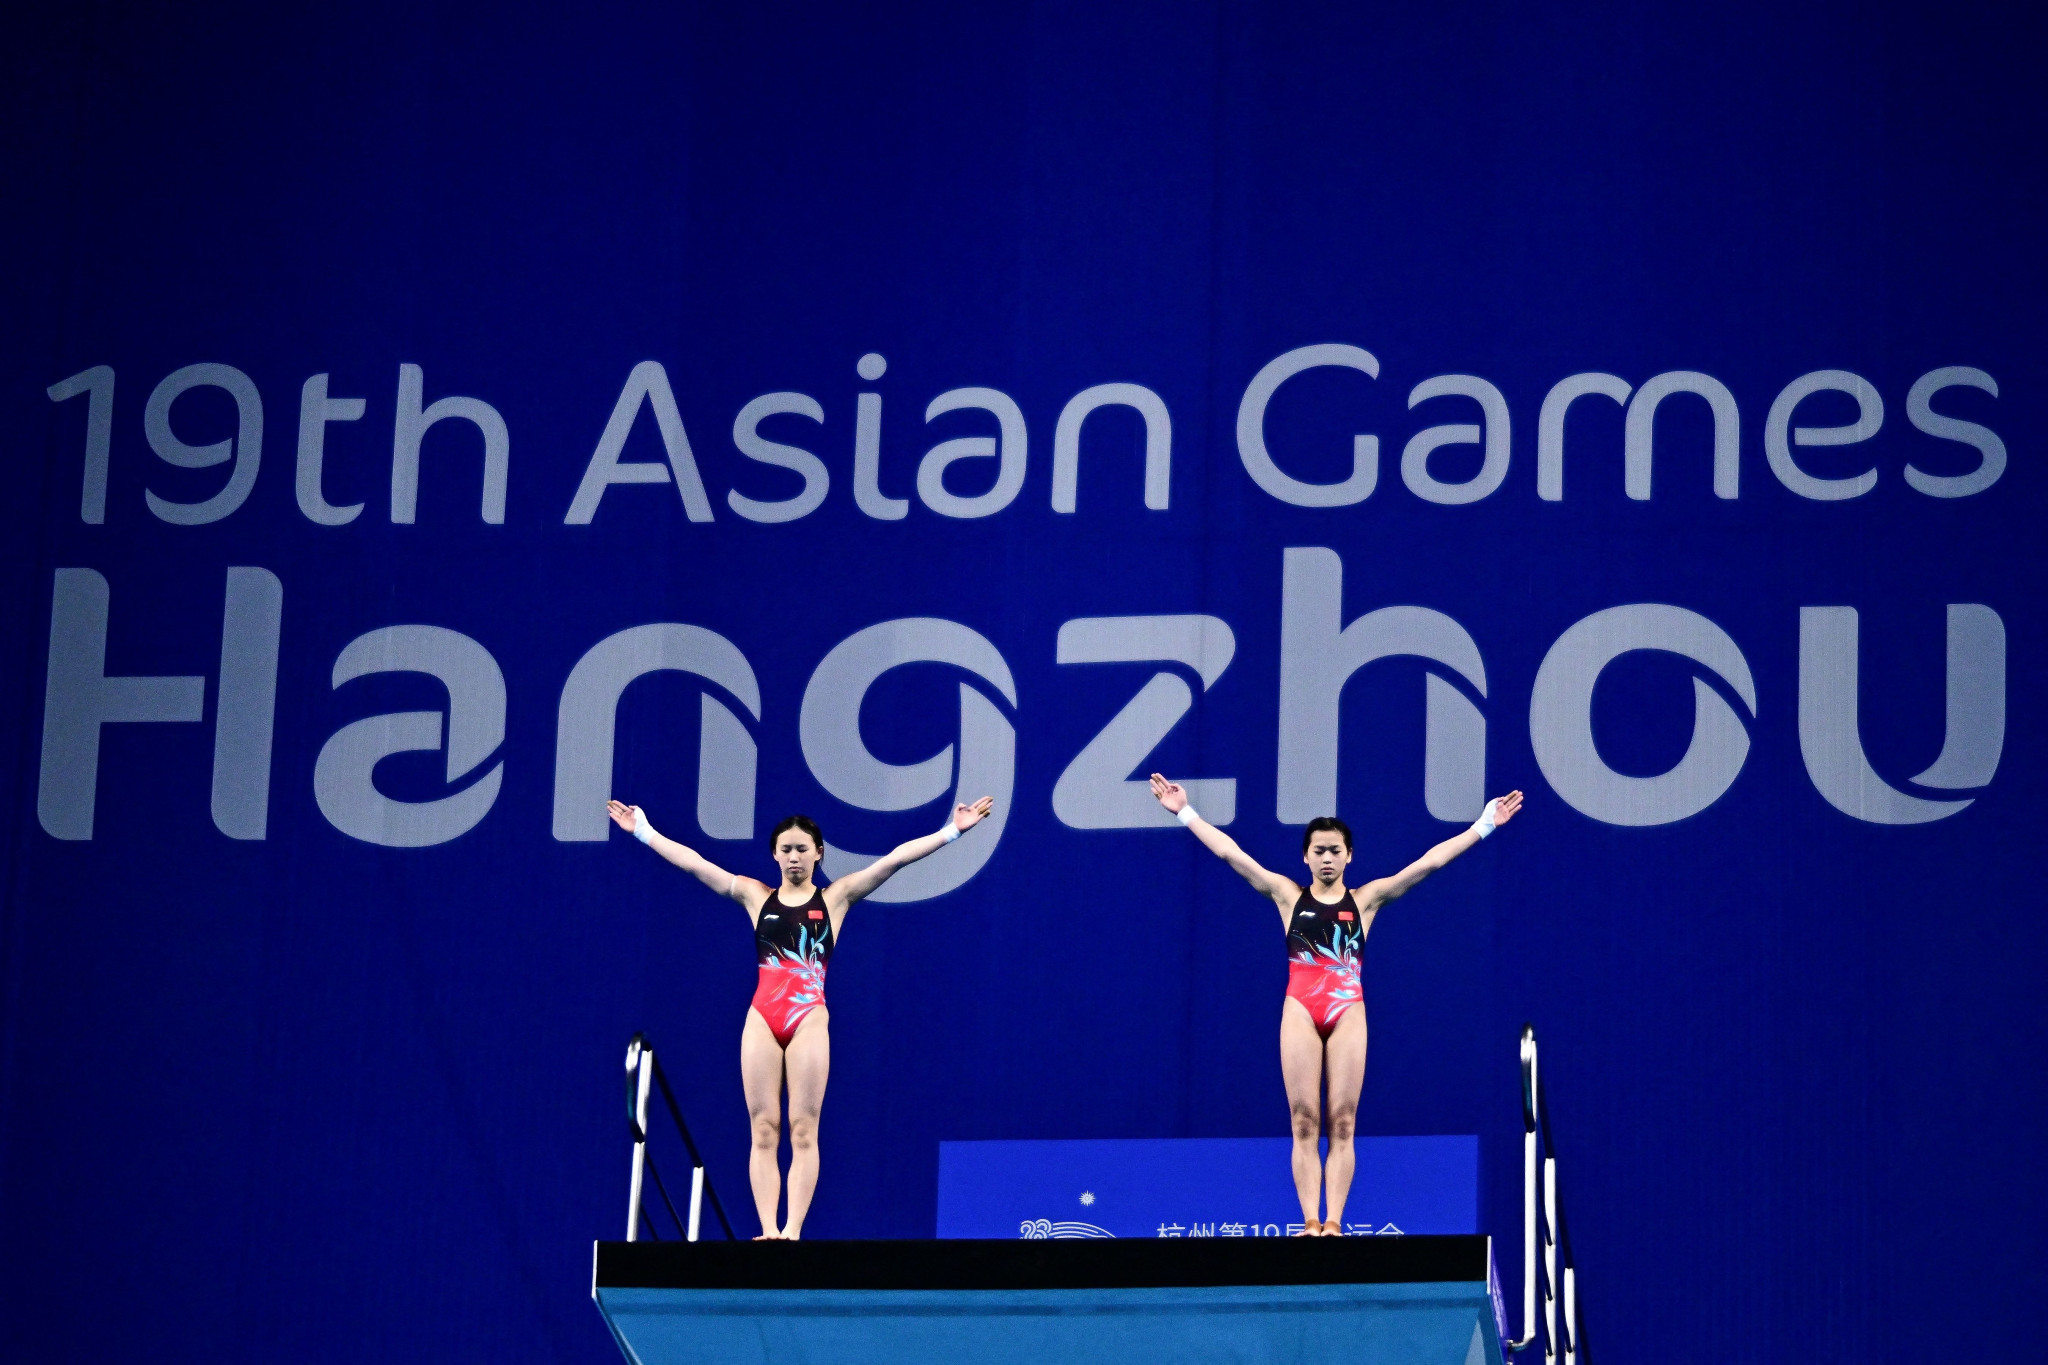 The venues used during the Asian Games have been hailed as being of 